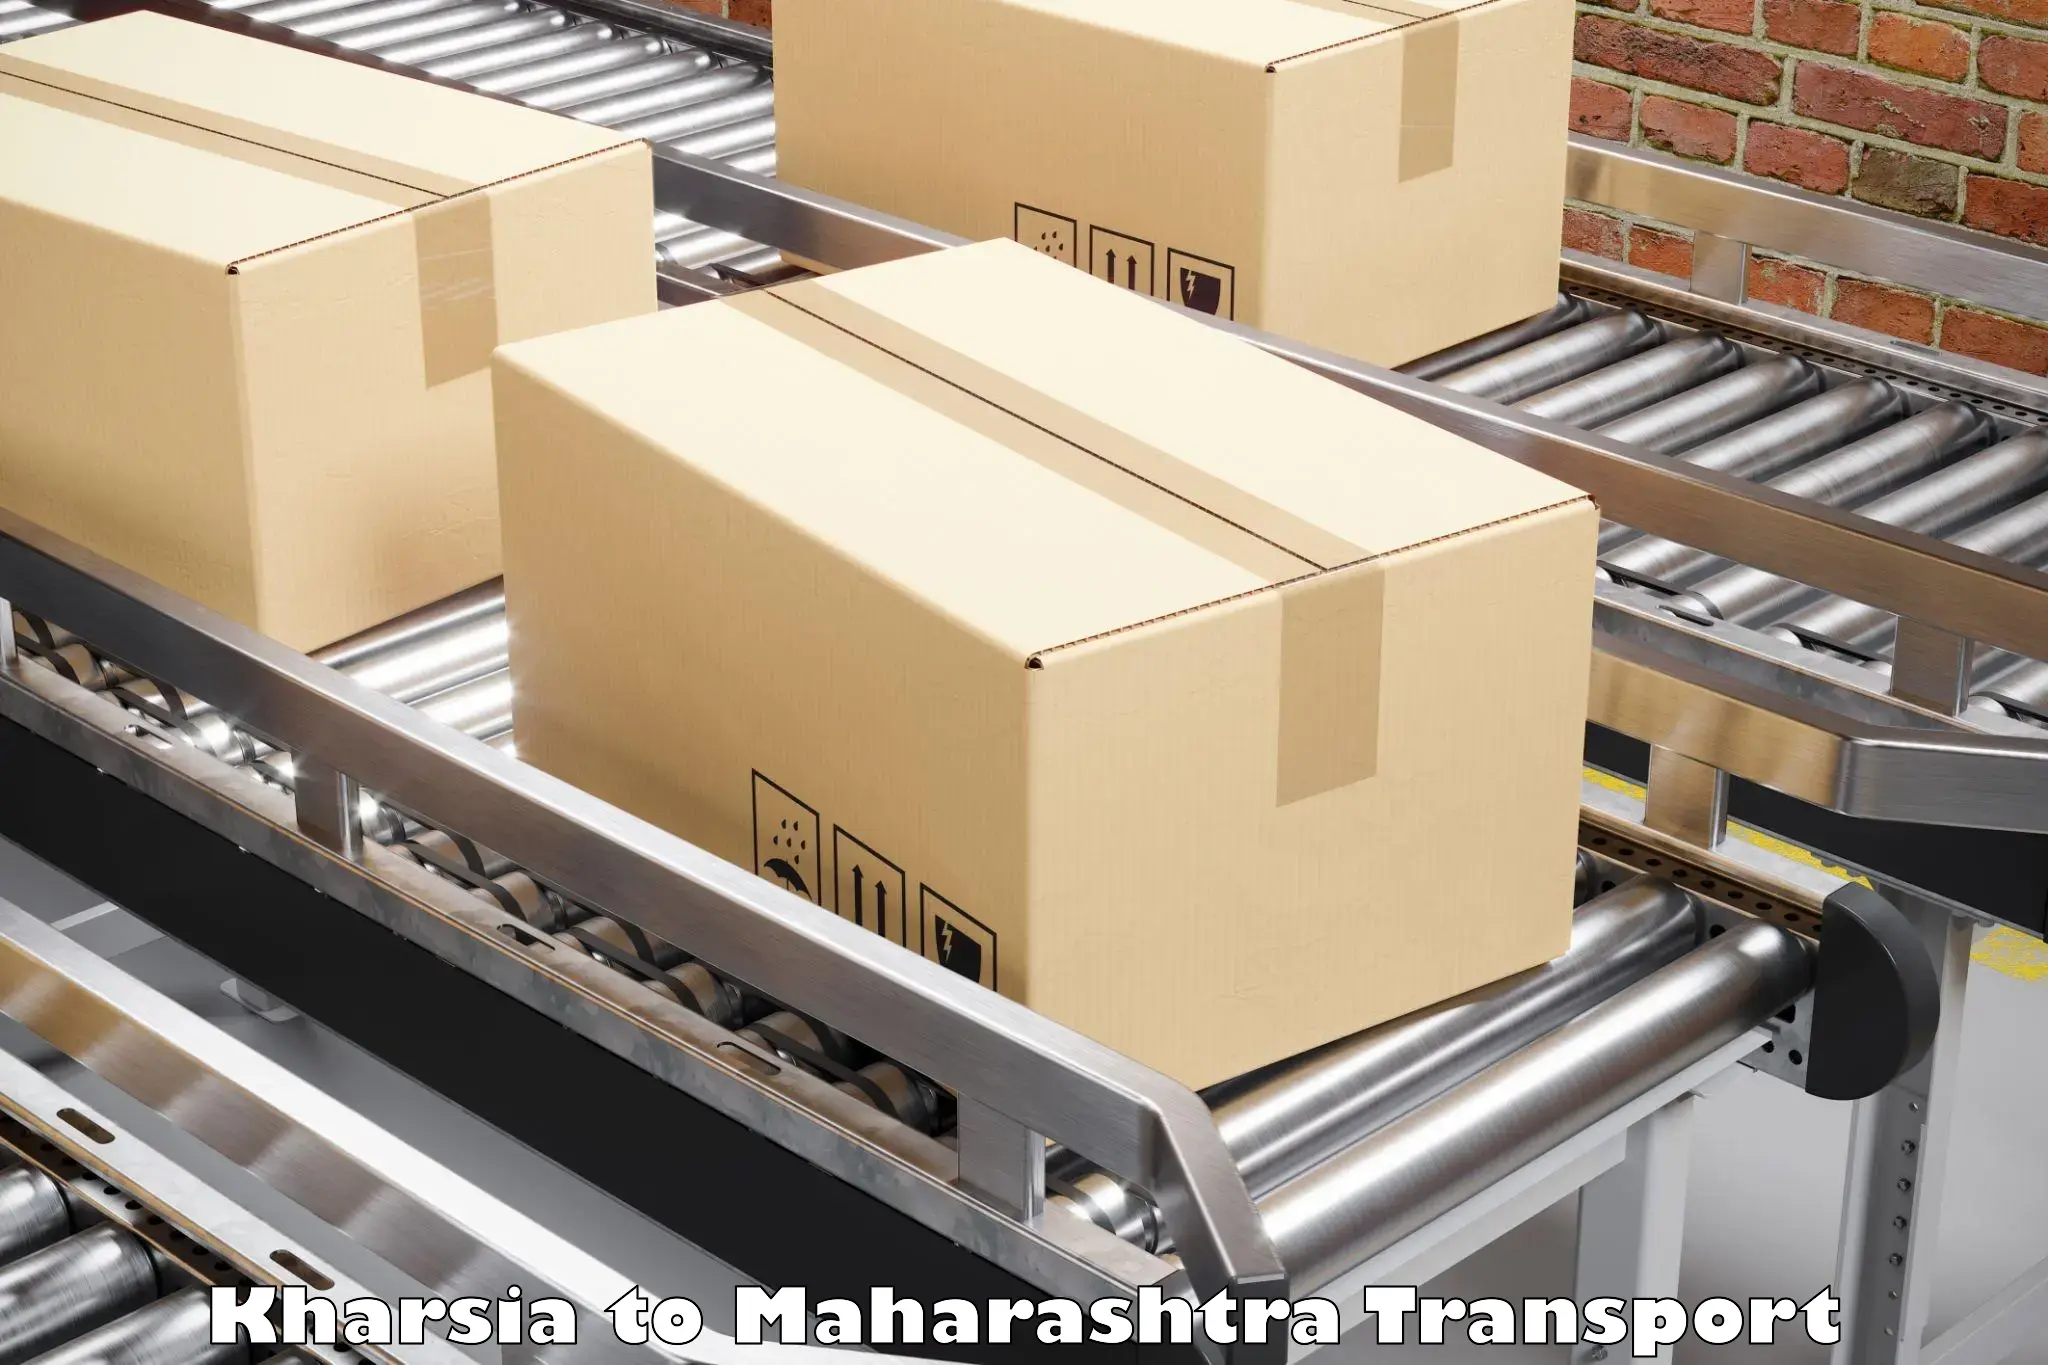 Express transport services Kharsia to Vadgaon